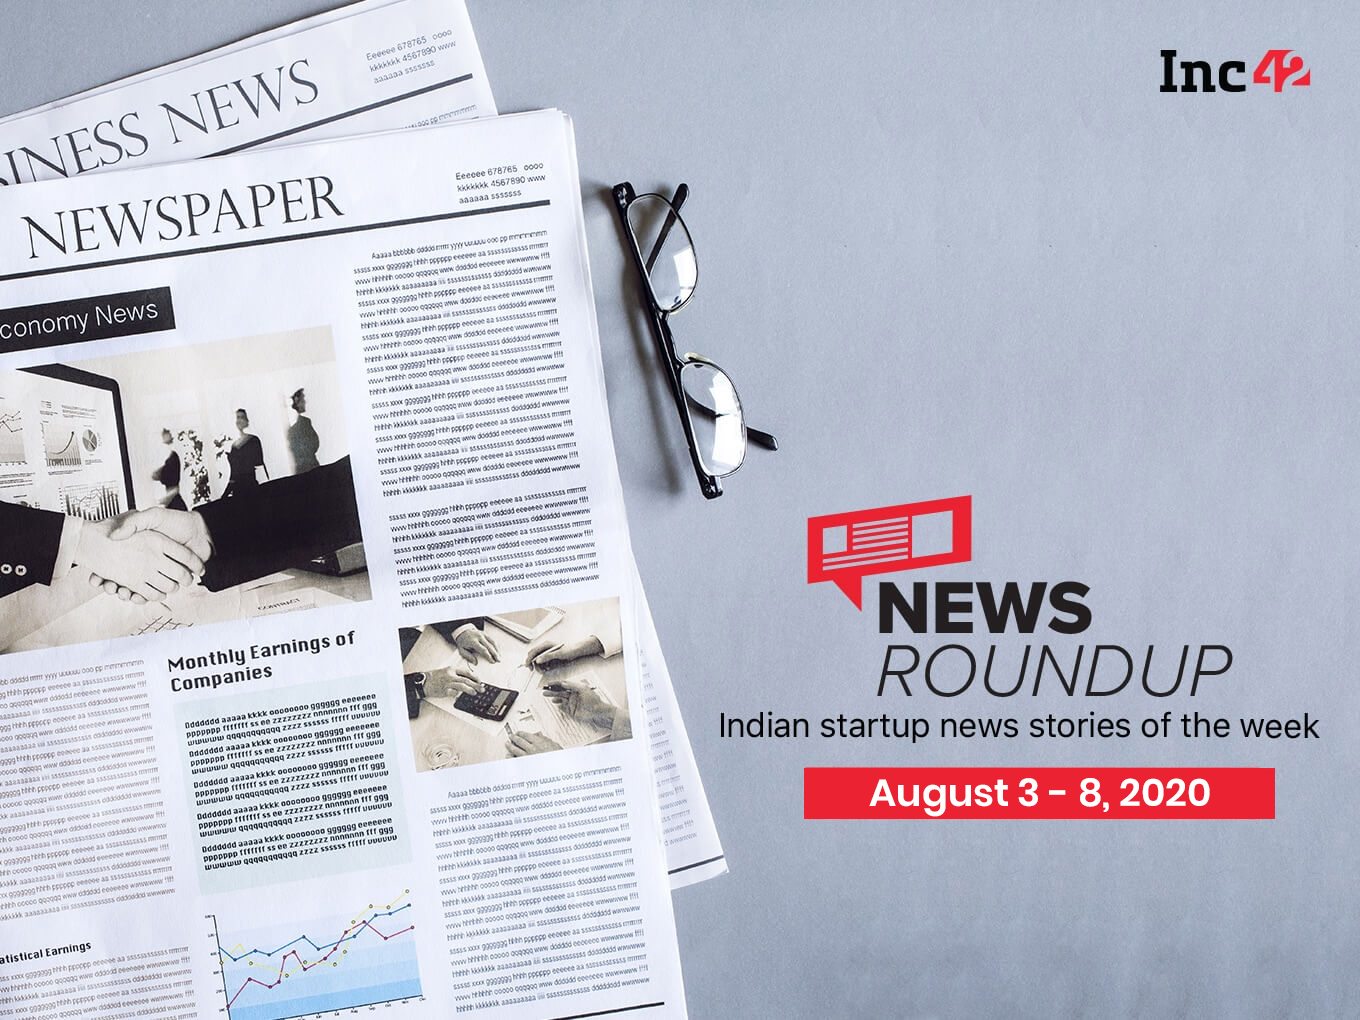 News Roundup: Indian Startup News Stories Of The Week [3-8 August]